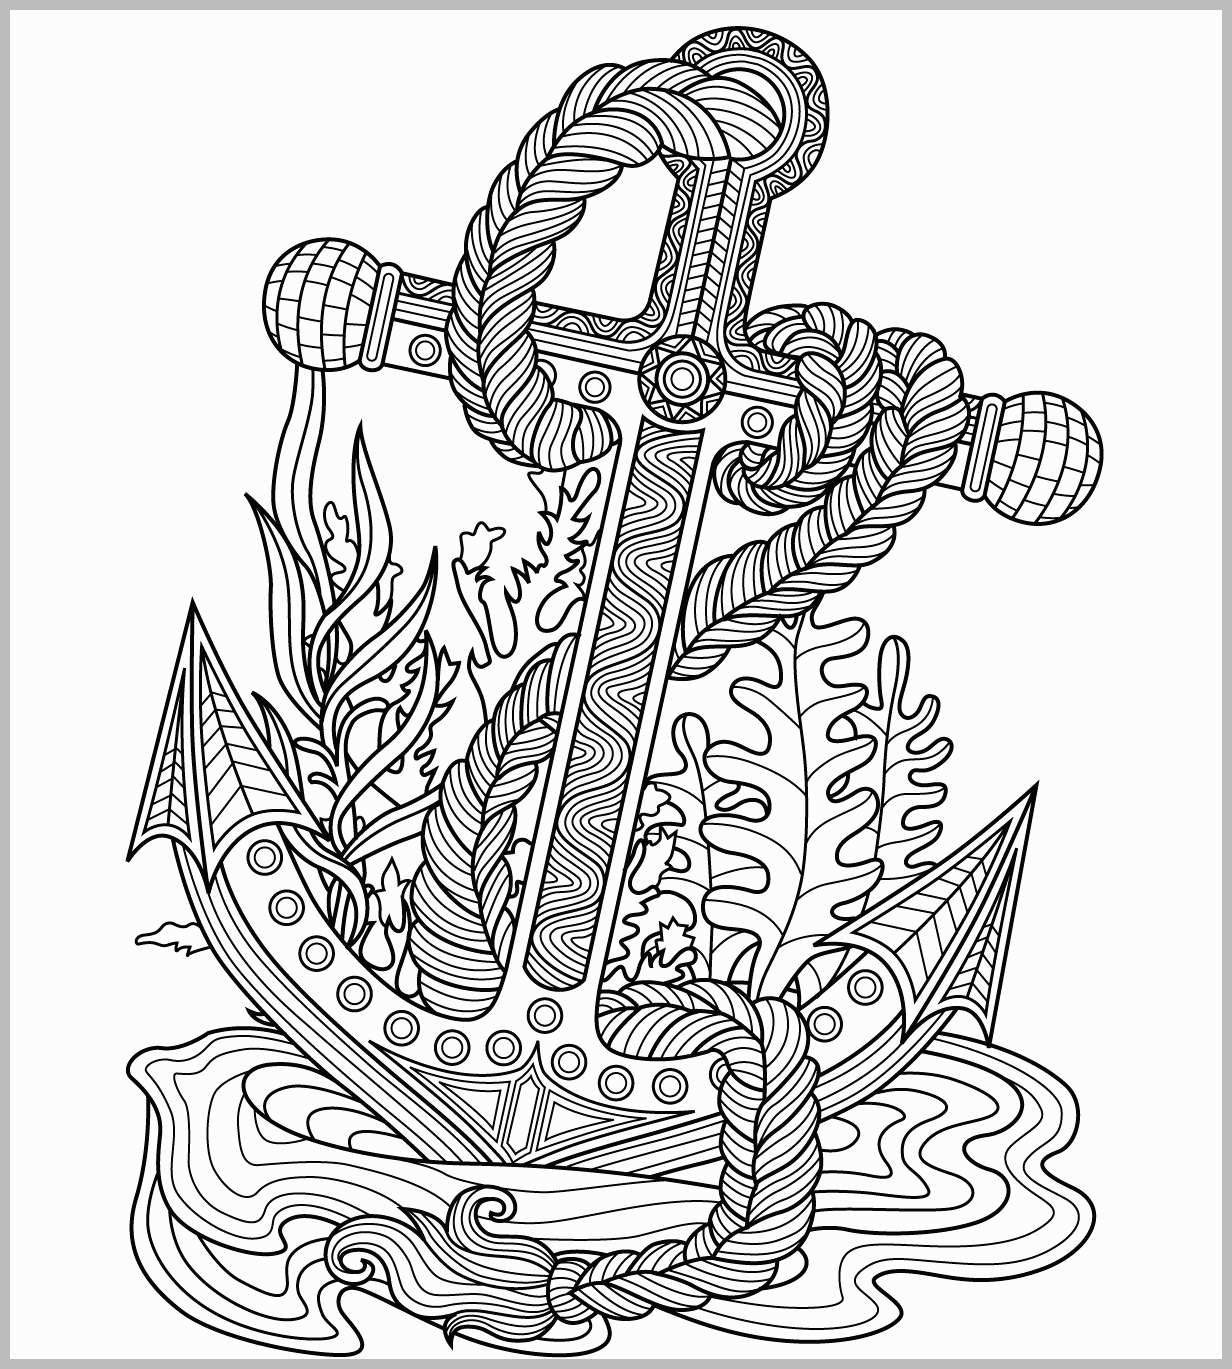 Anchor Coloring Page Anchor Coloring Page Best Anchors Coloring ...